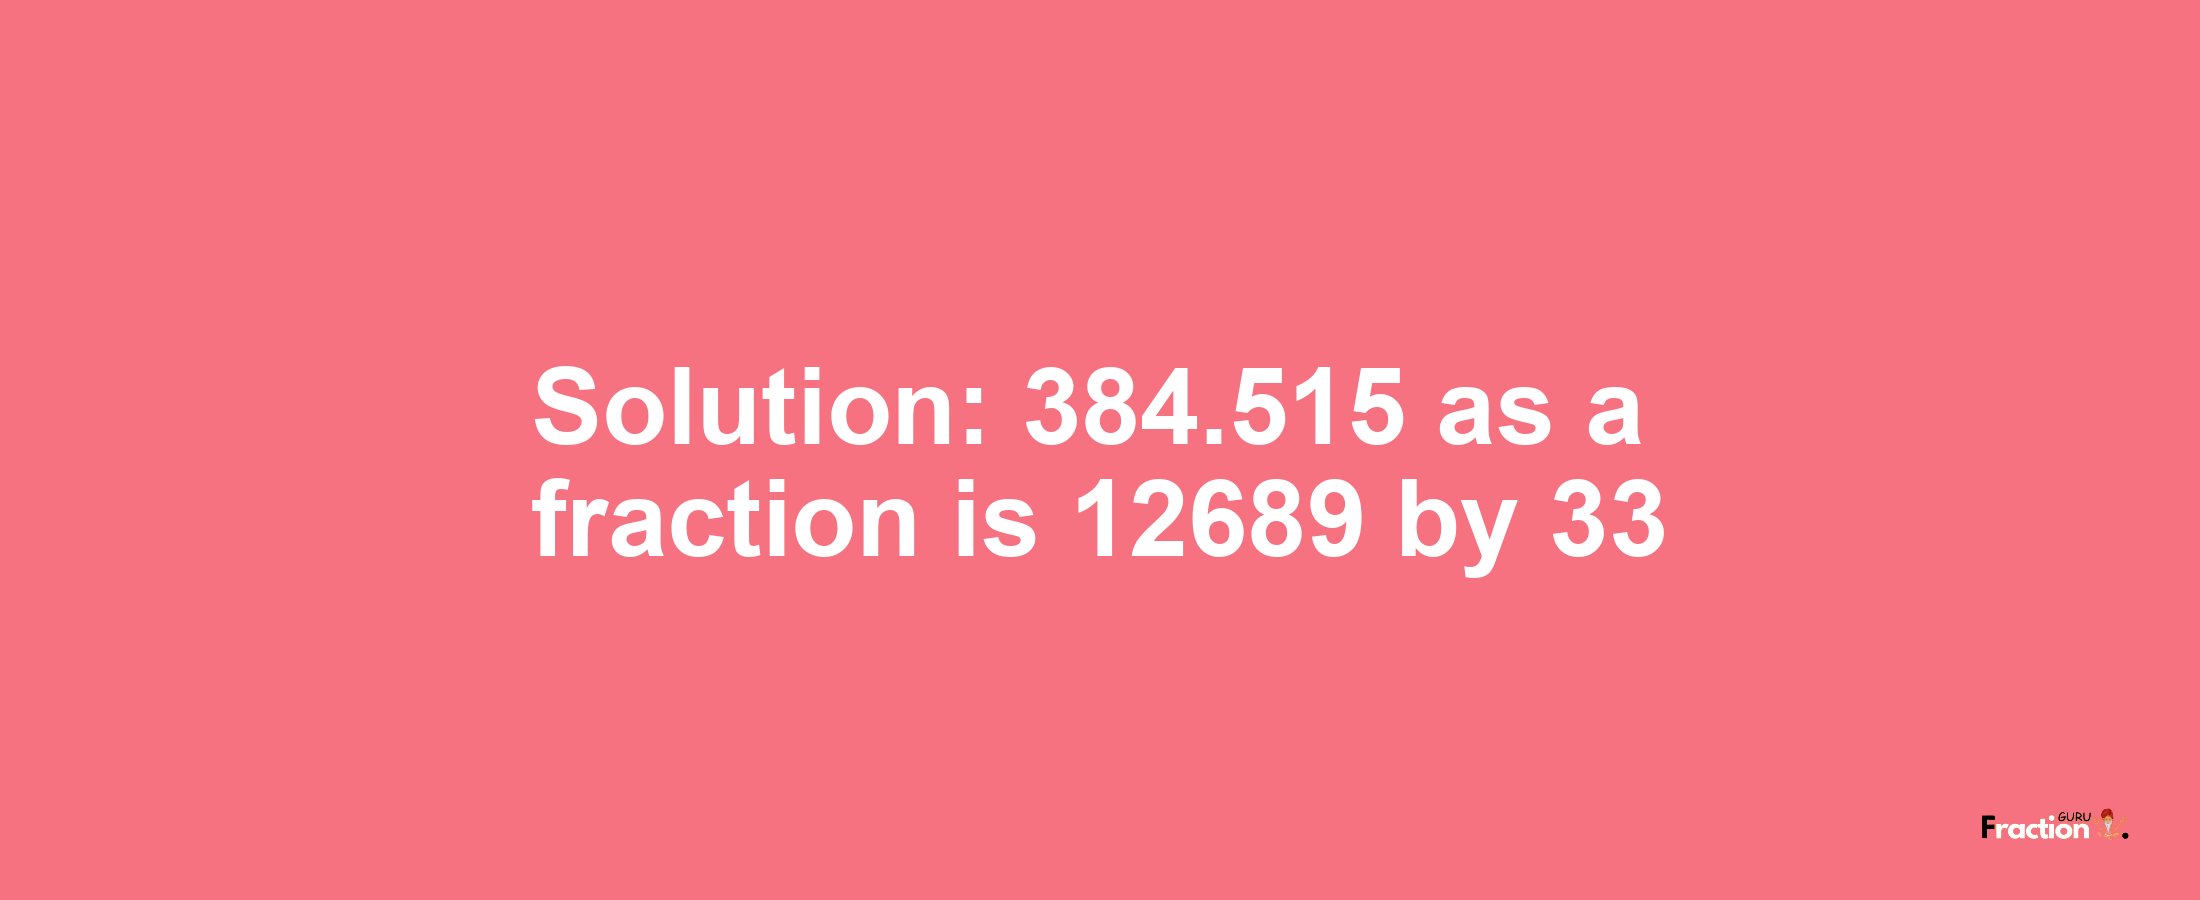 Solution:384.515 as a fraction is 12689/33